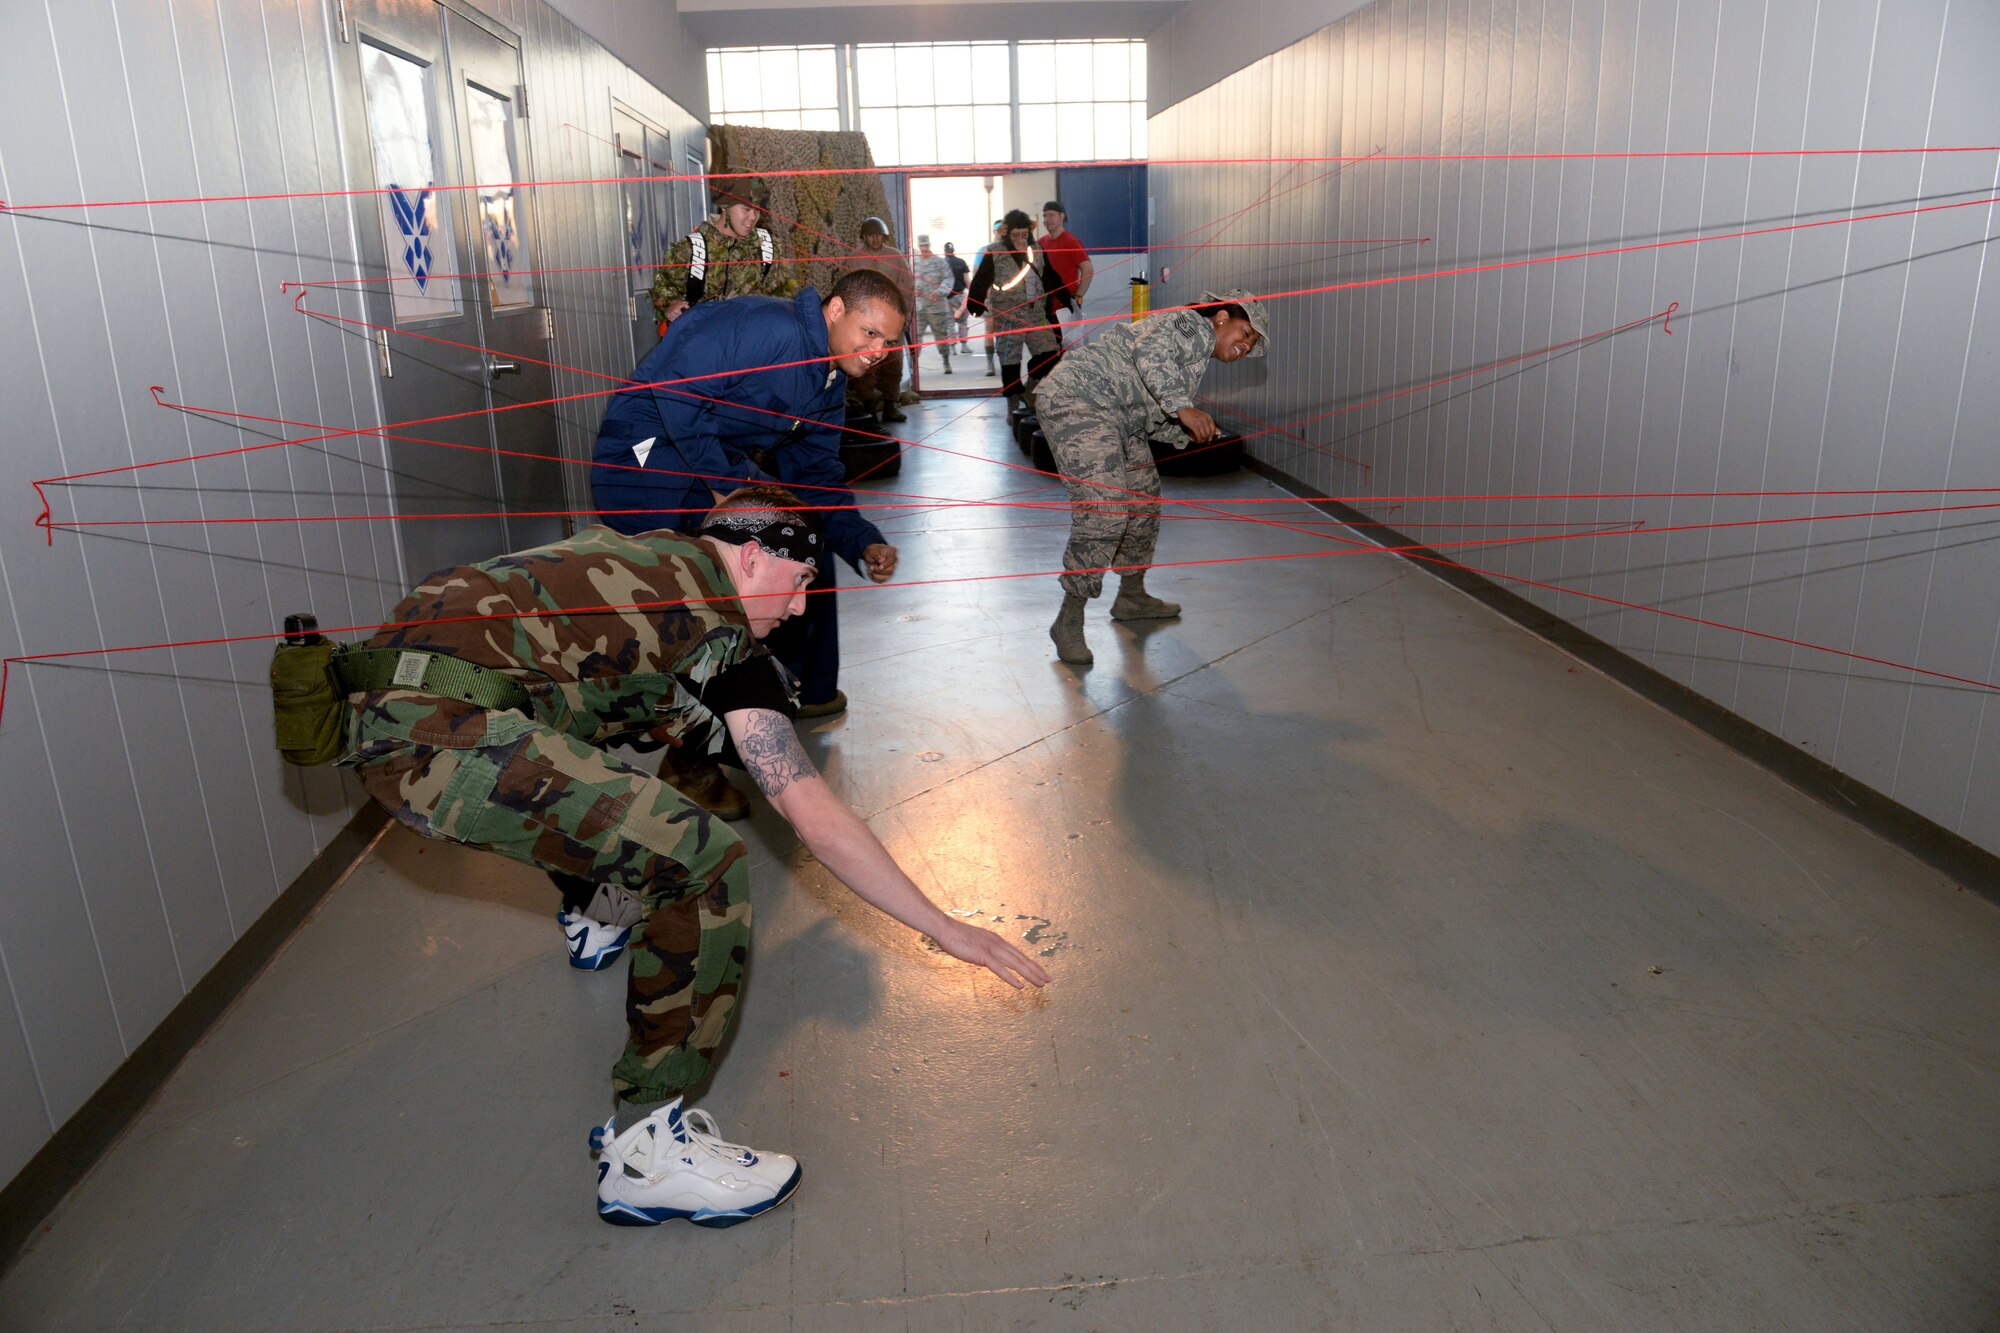 Maxwell Combat Dining-In attendees move through an obstacle course to enter the event, Nov. 4, 2016, Maxwell Air Force Base, Ala. Airmen has to jump through tires and maneuver through red yarn meant to mimic laser beams to be allowed entrance into the event. (U.S. Air Force photo/ Senior Airman Alexa Culbert)